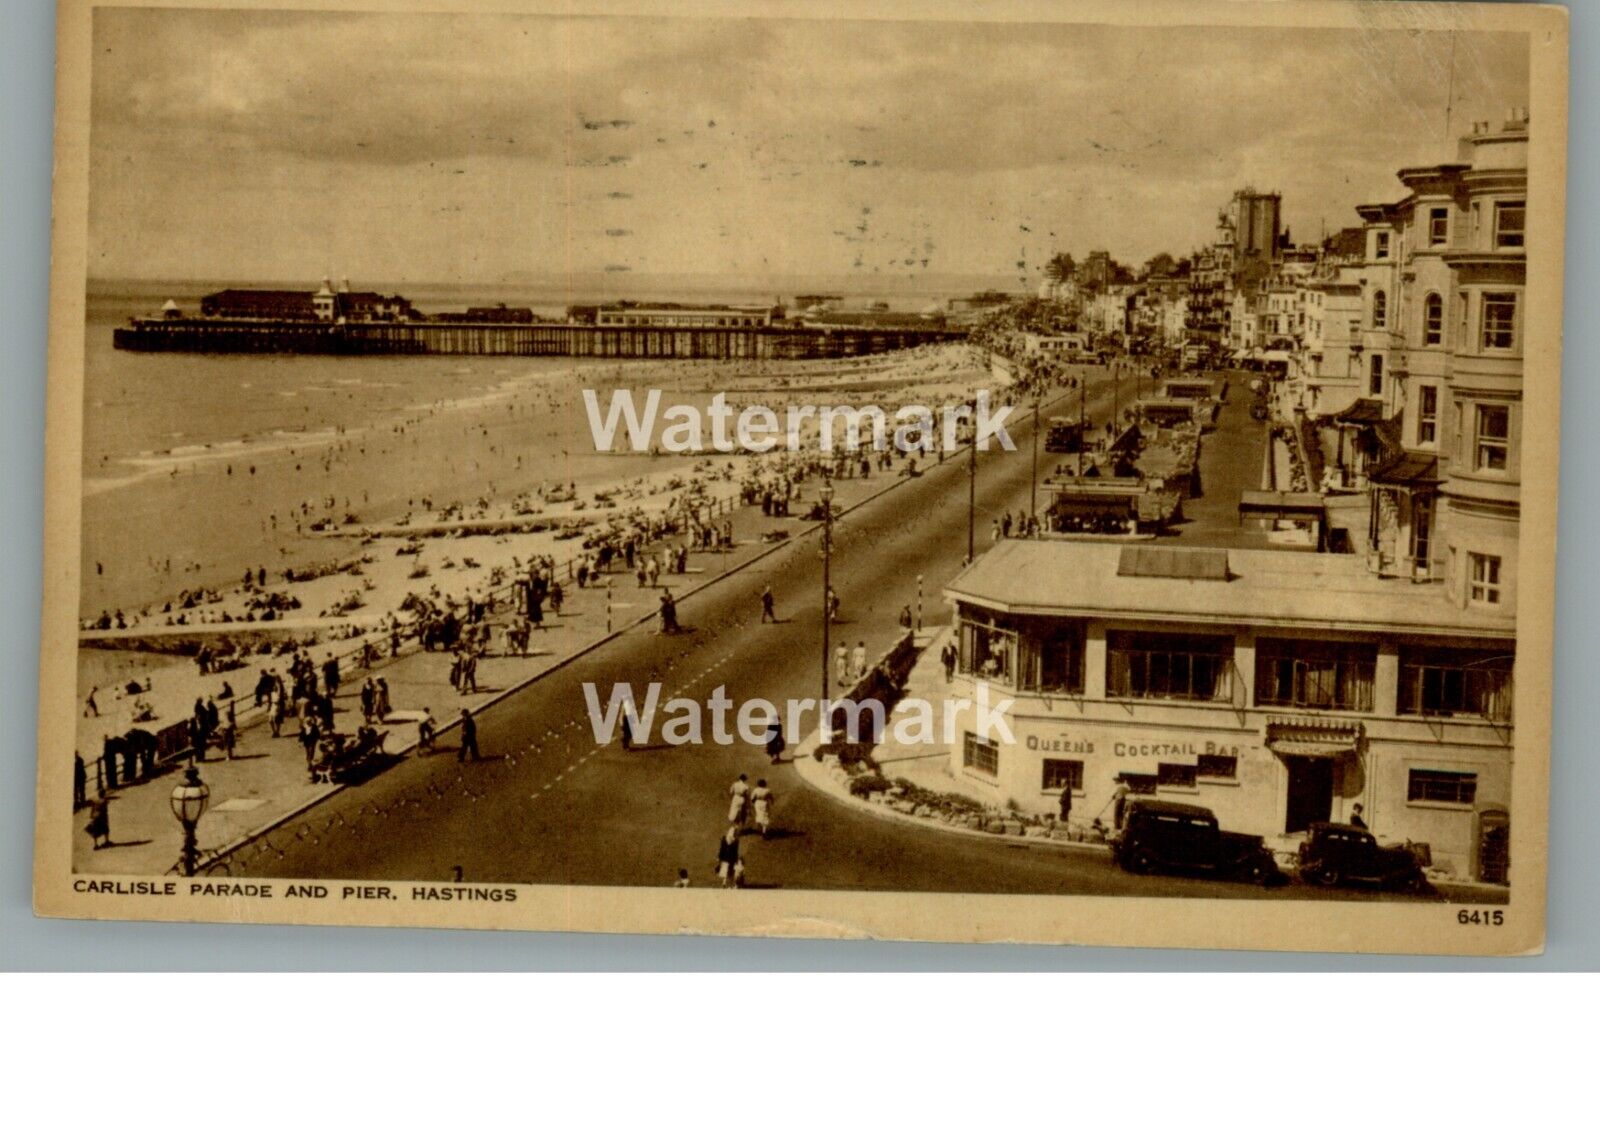 House Clearance - A1080. Carlisle Parade & Pier, Hastings, Sussex. Norman Series. Posted 1951